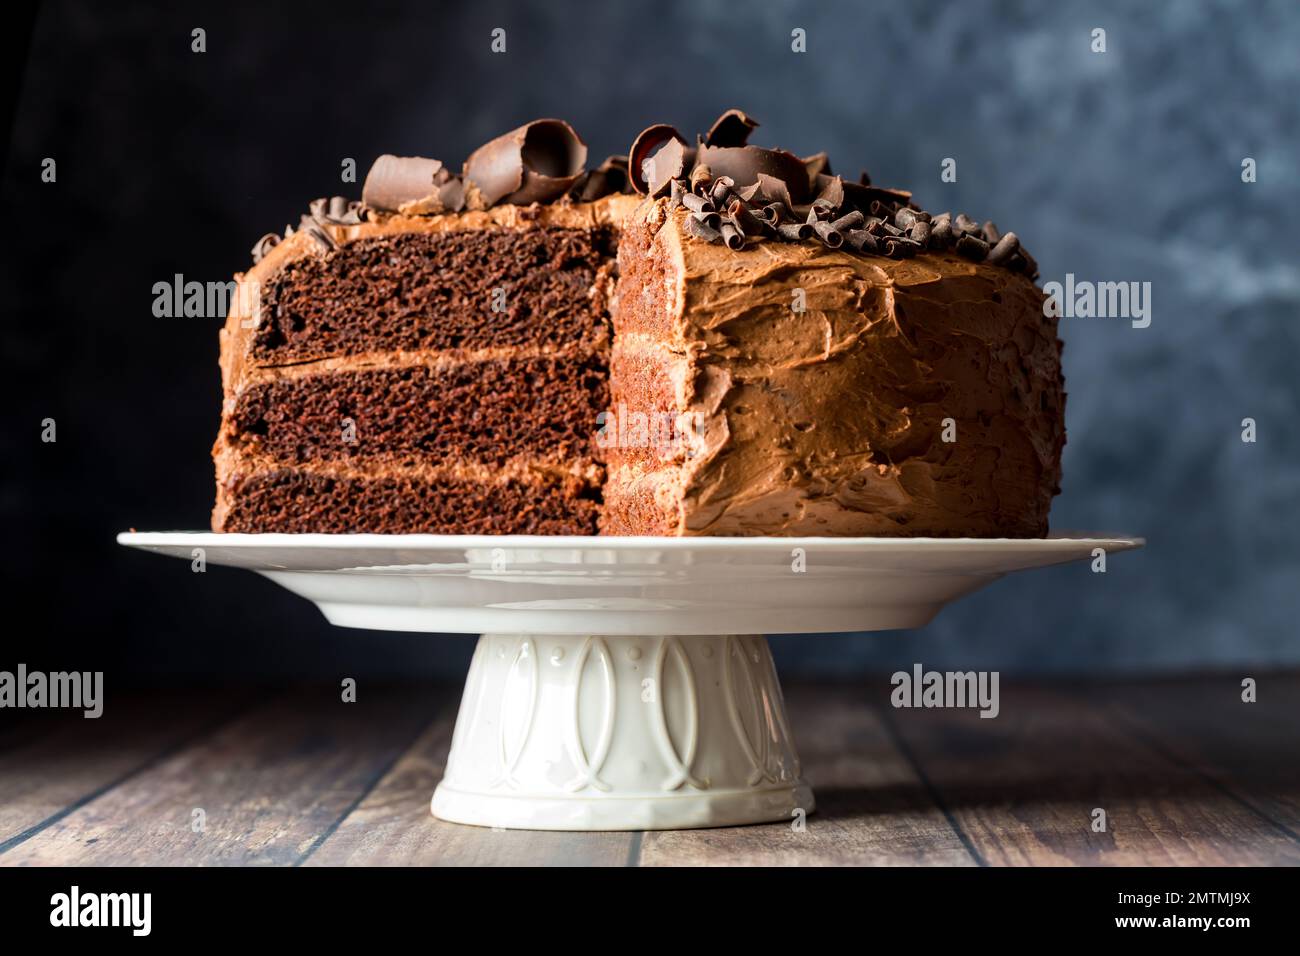 A delicious homemade triple layered low sugar chocolate cake on a pedestal stand Stock Photo